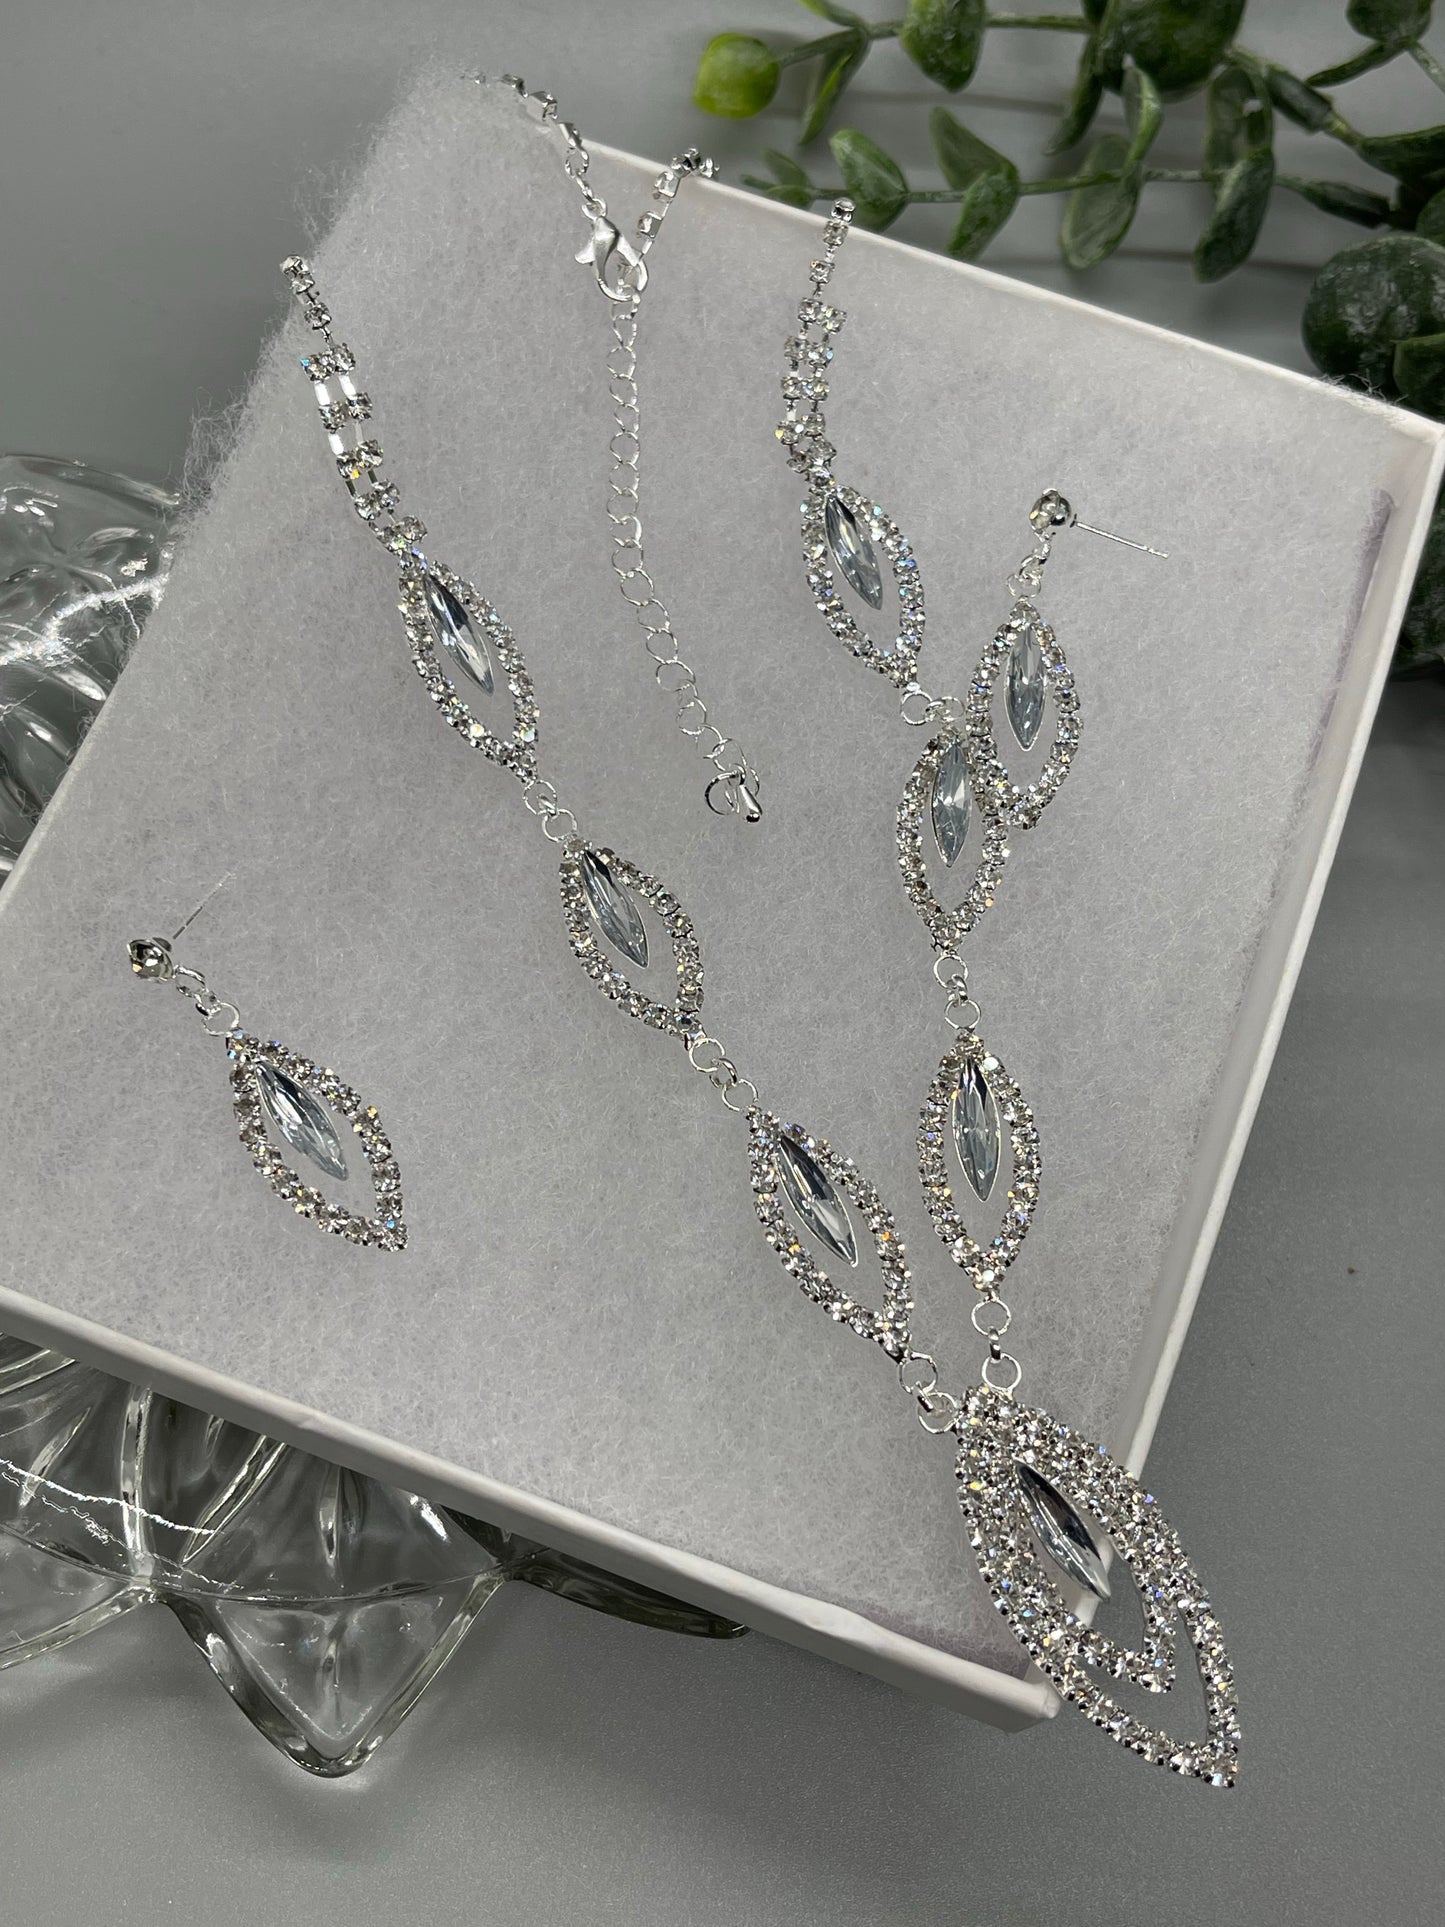 Clear Crystal Rhinestone necklace earrings set bridal wedding engagement formal accessory accessories